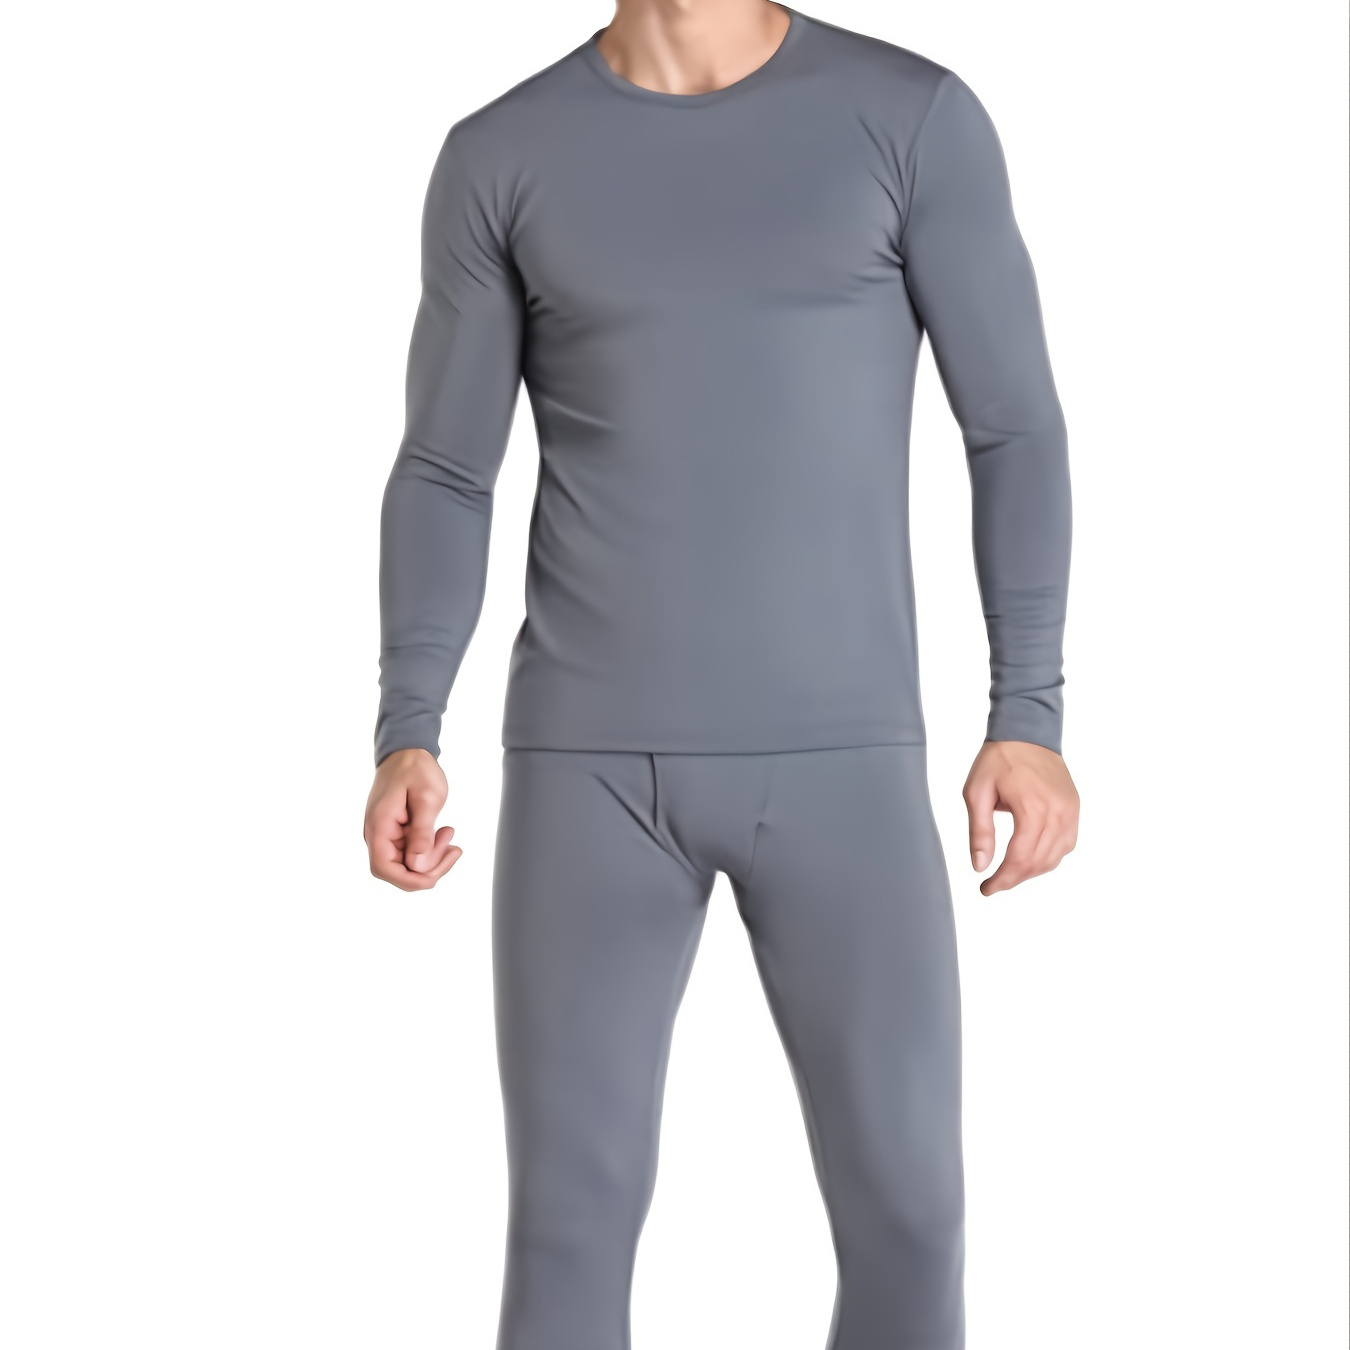 Thermal Underwear for Men Long Johns Long Underwear Set Cold Weather Winter  Top Bottom 2 Piece Base Layer Suit Sets